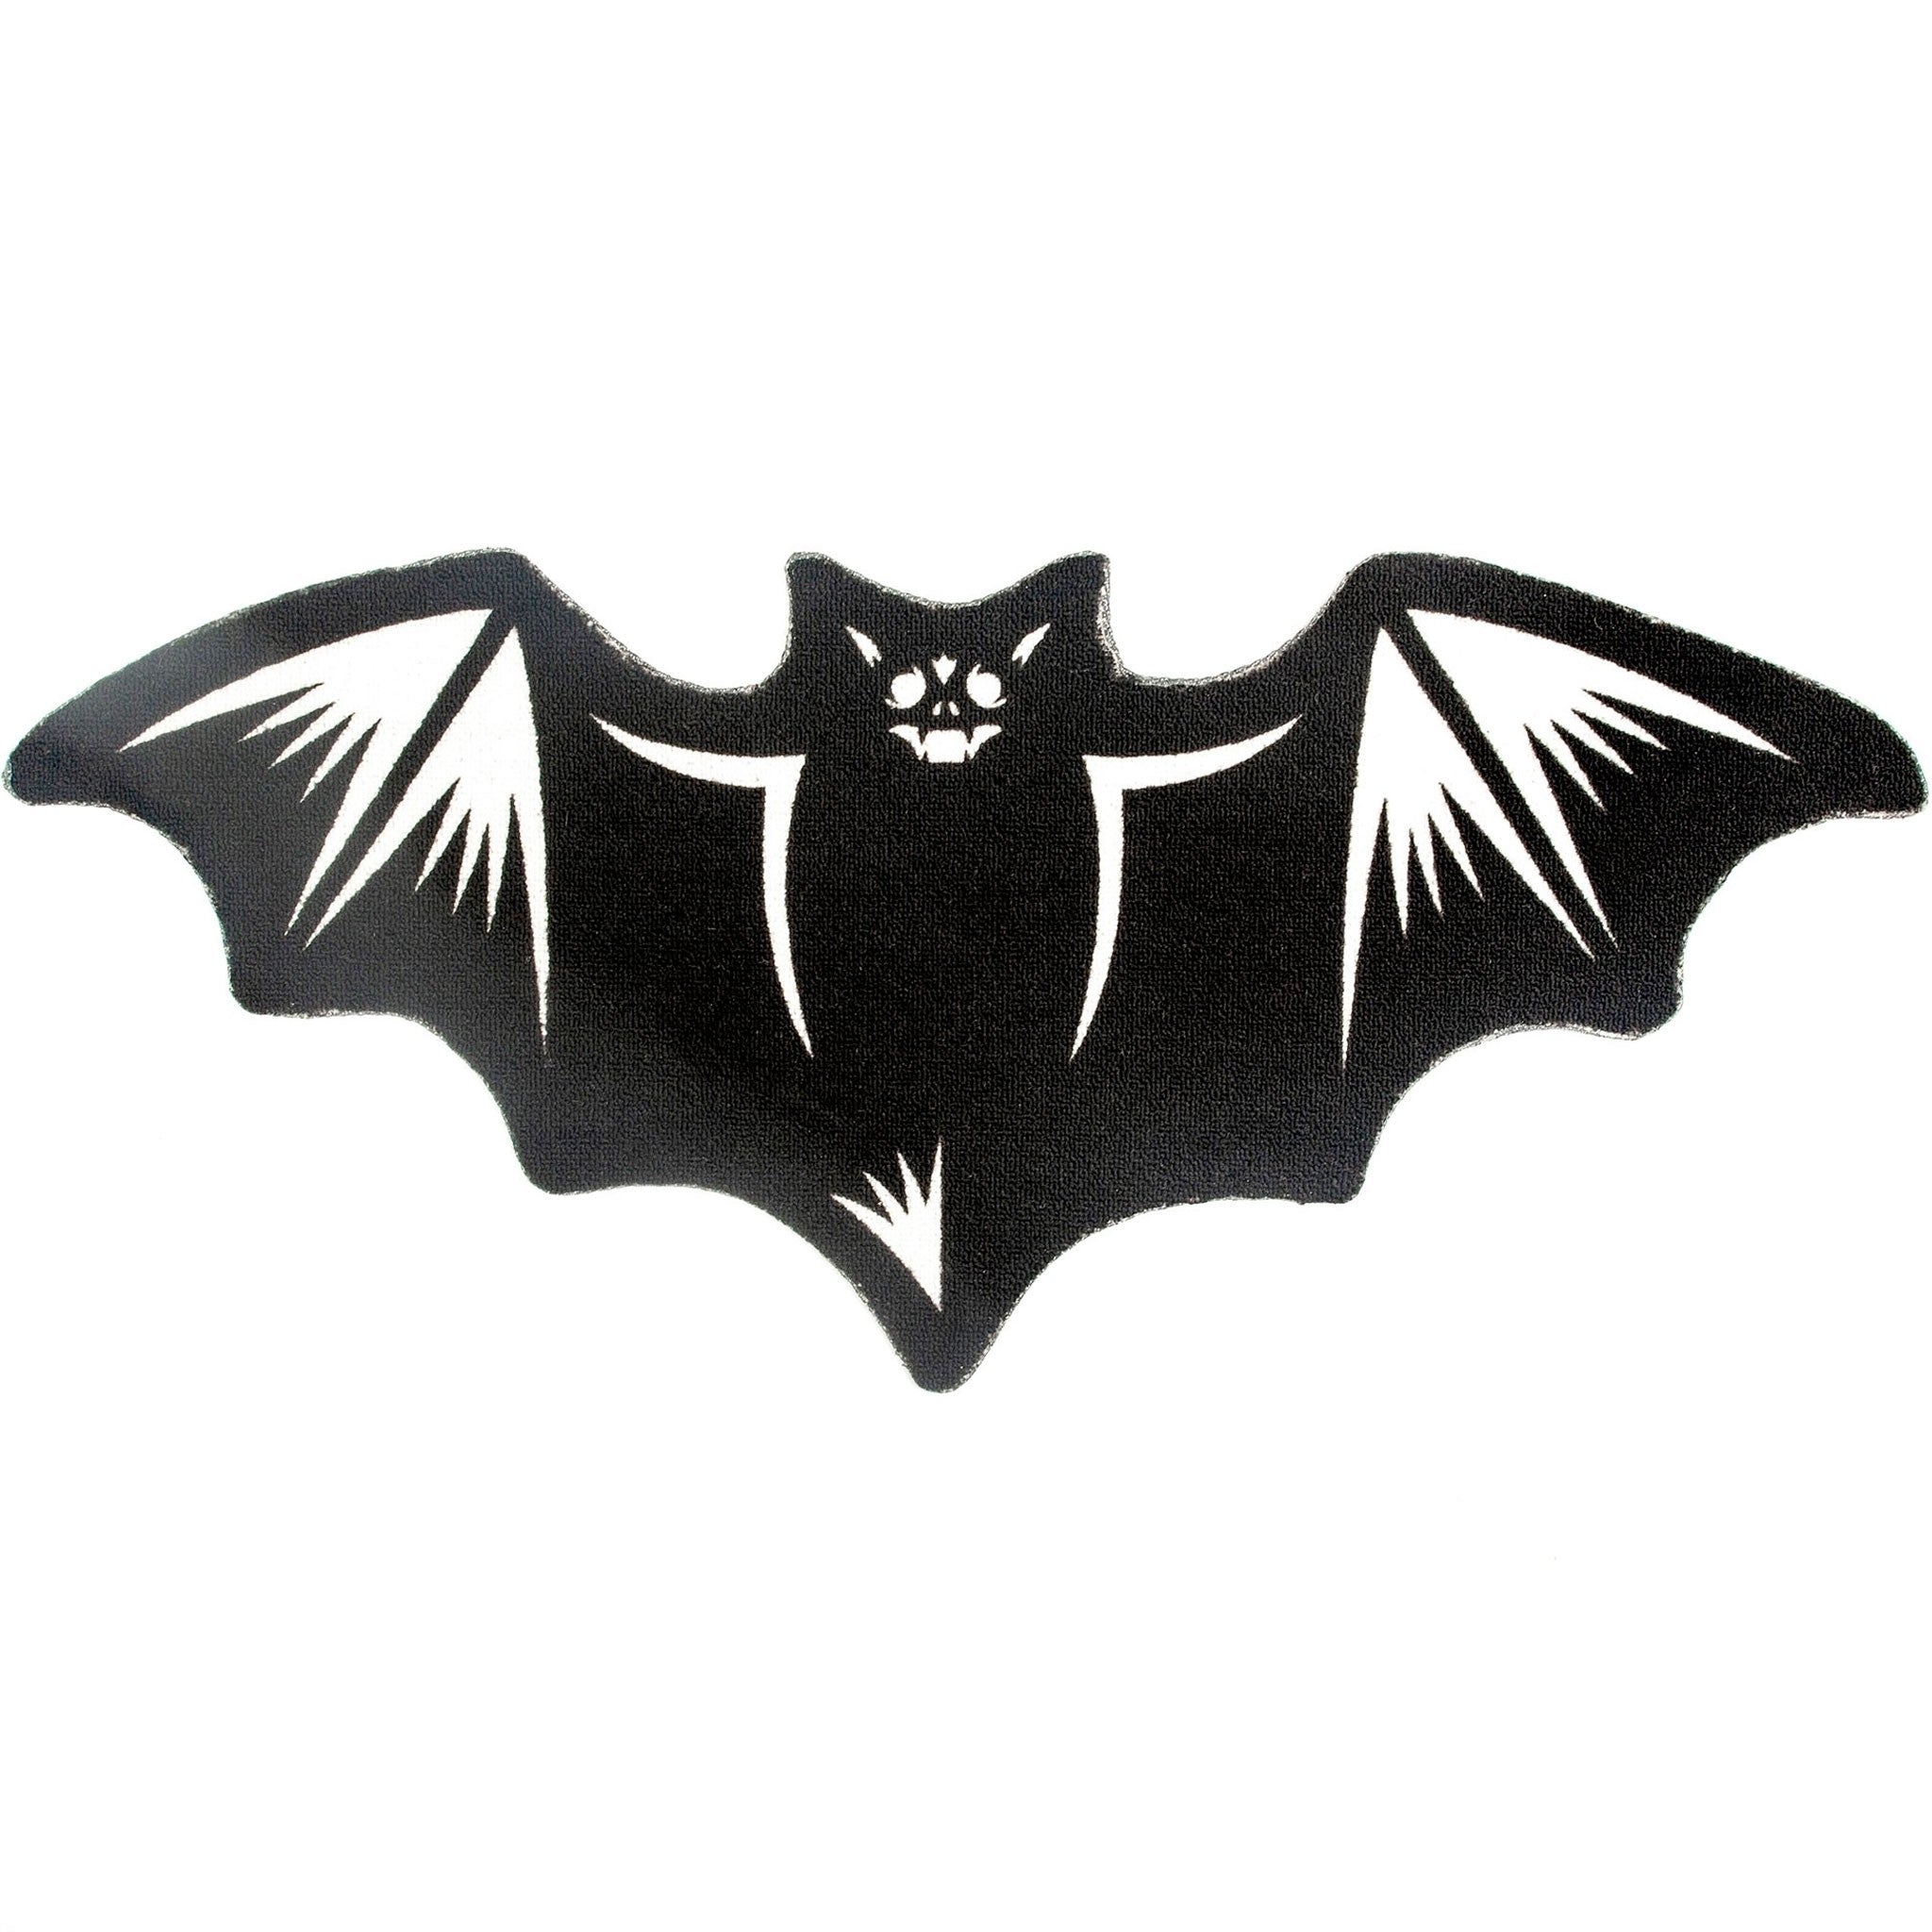 2' black & white bat-shaped shaped area throw rug from with a tight loop printed design on front